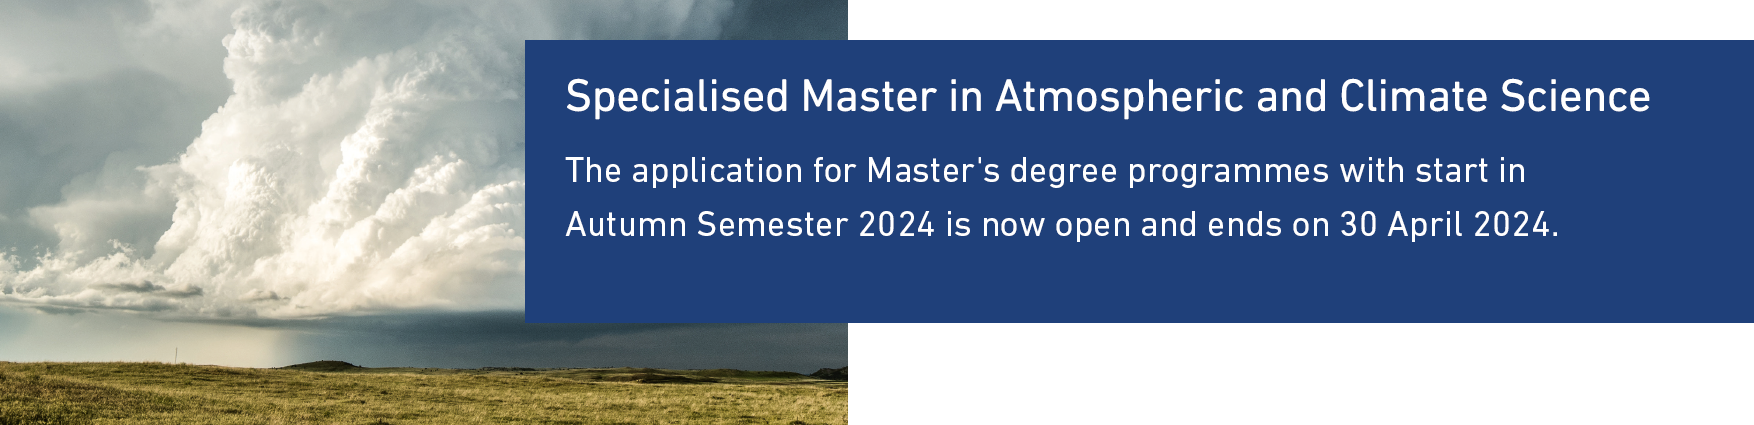 Specialised Master in Atmospheric and Climate Science